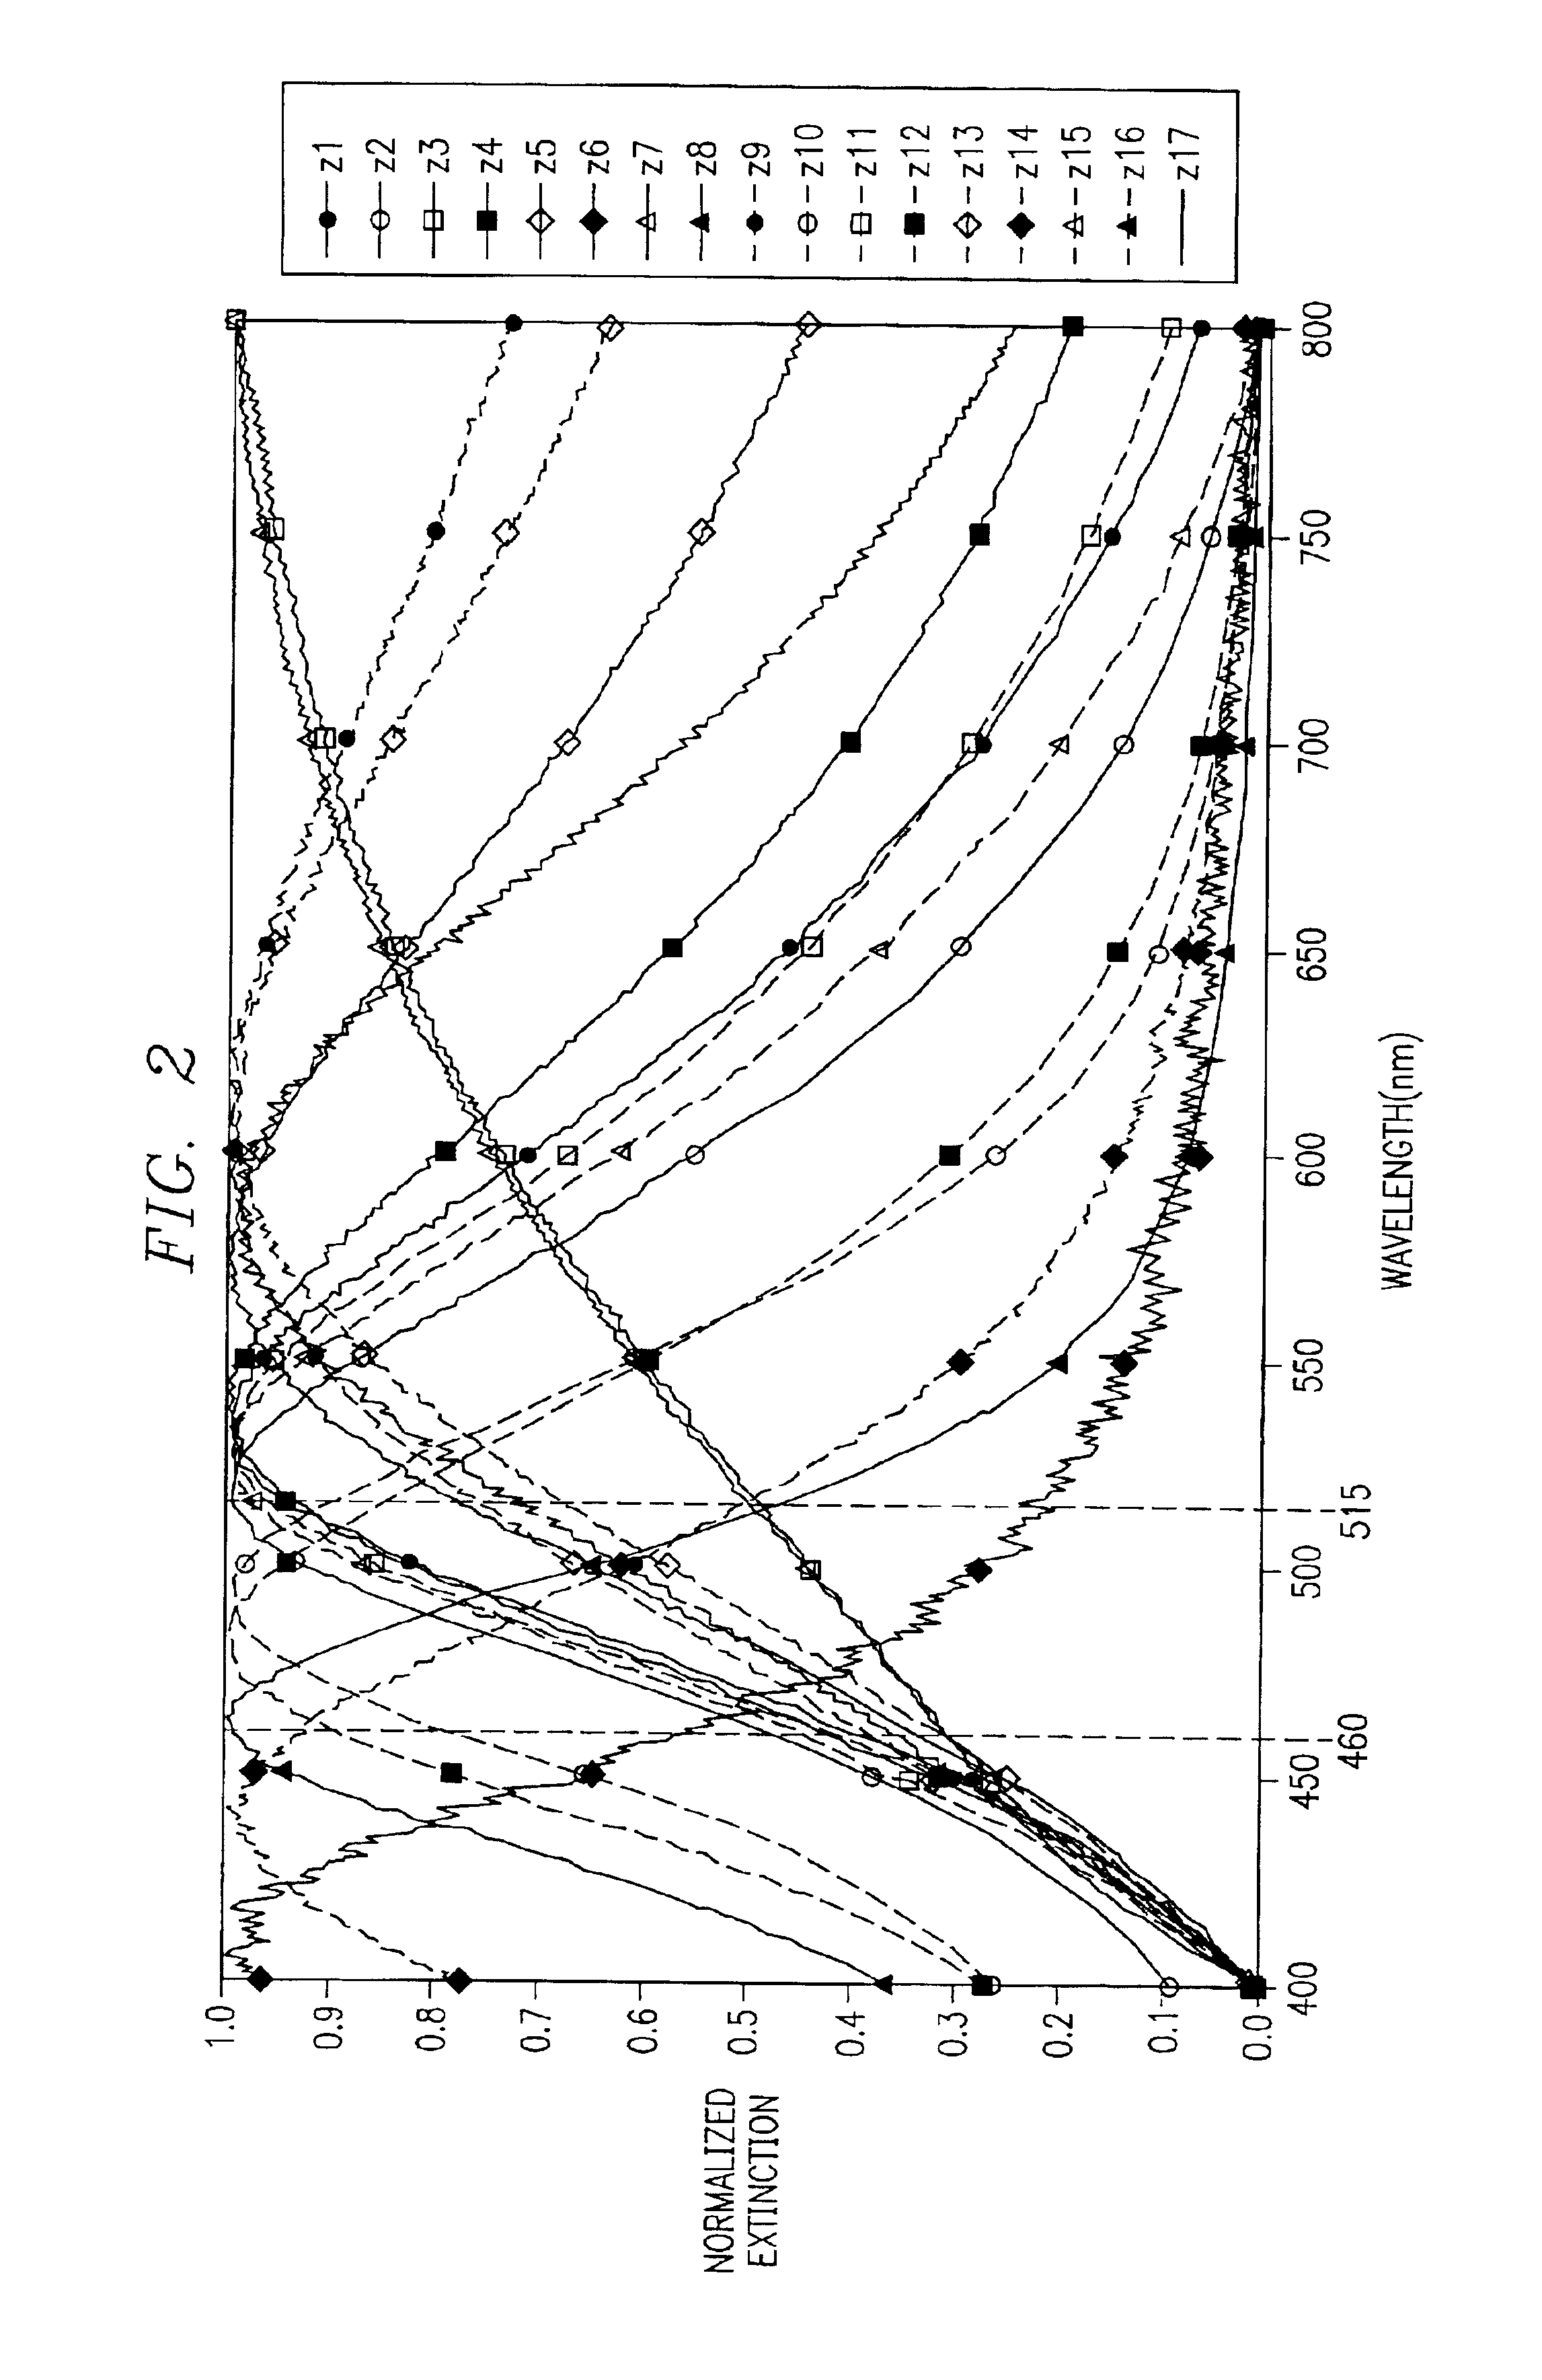 System and method for controlling deposition parameters in producing a surface to tune the surface's plasmon resonance wavelength